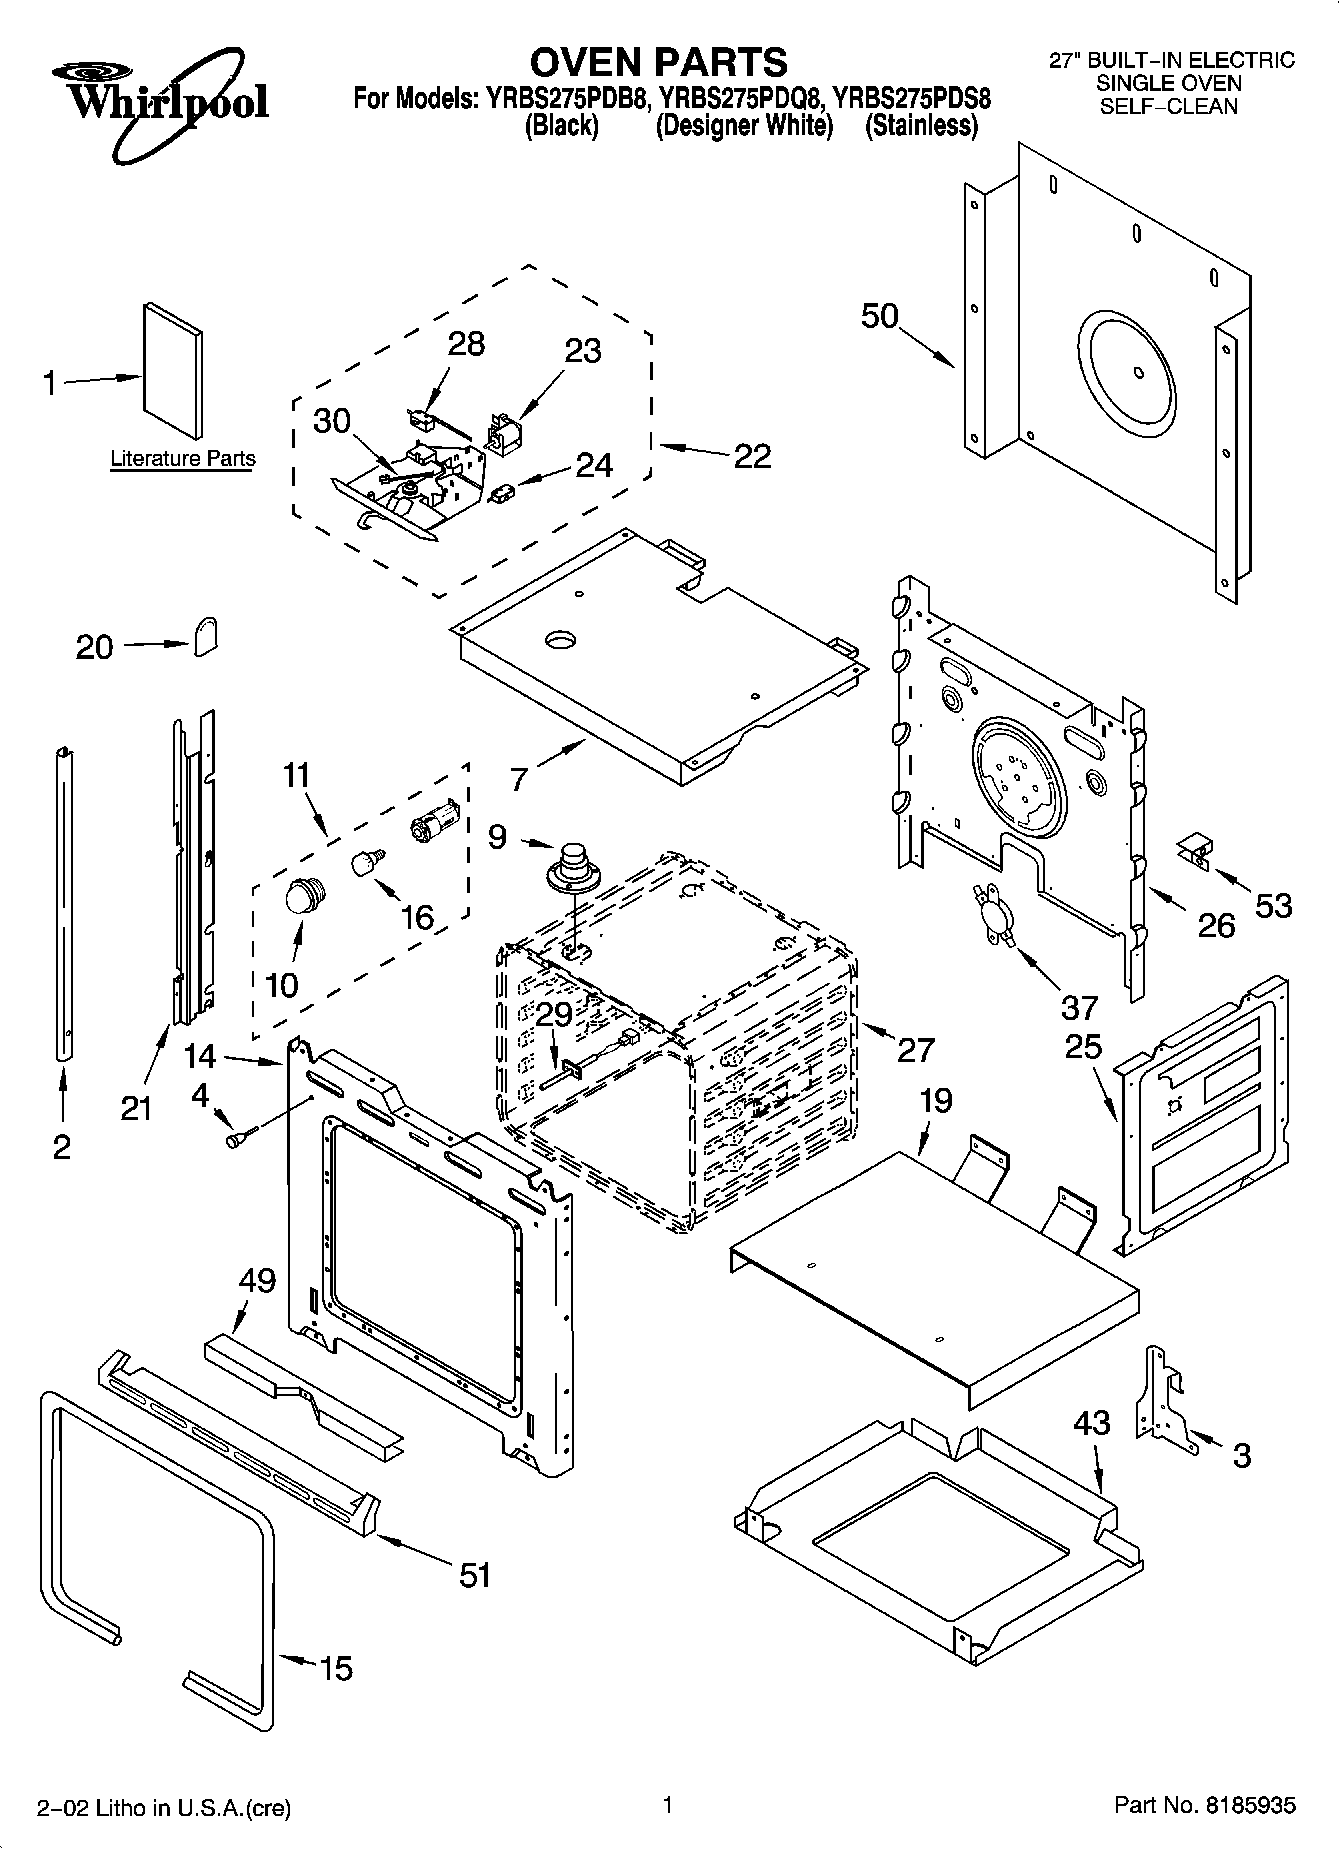 01 - OVEN PARTS